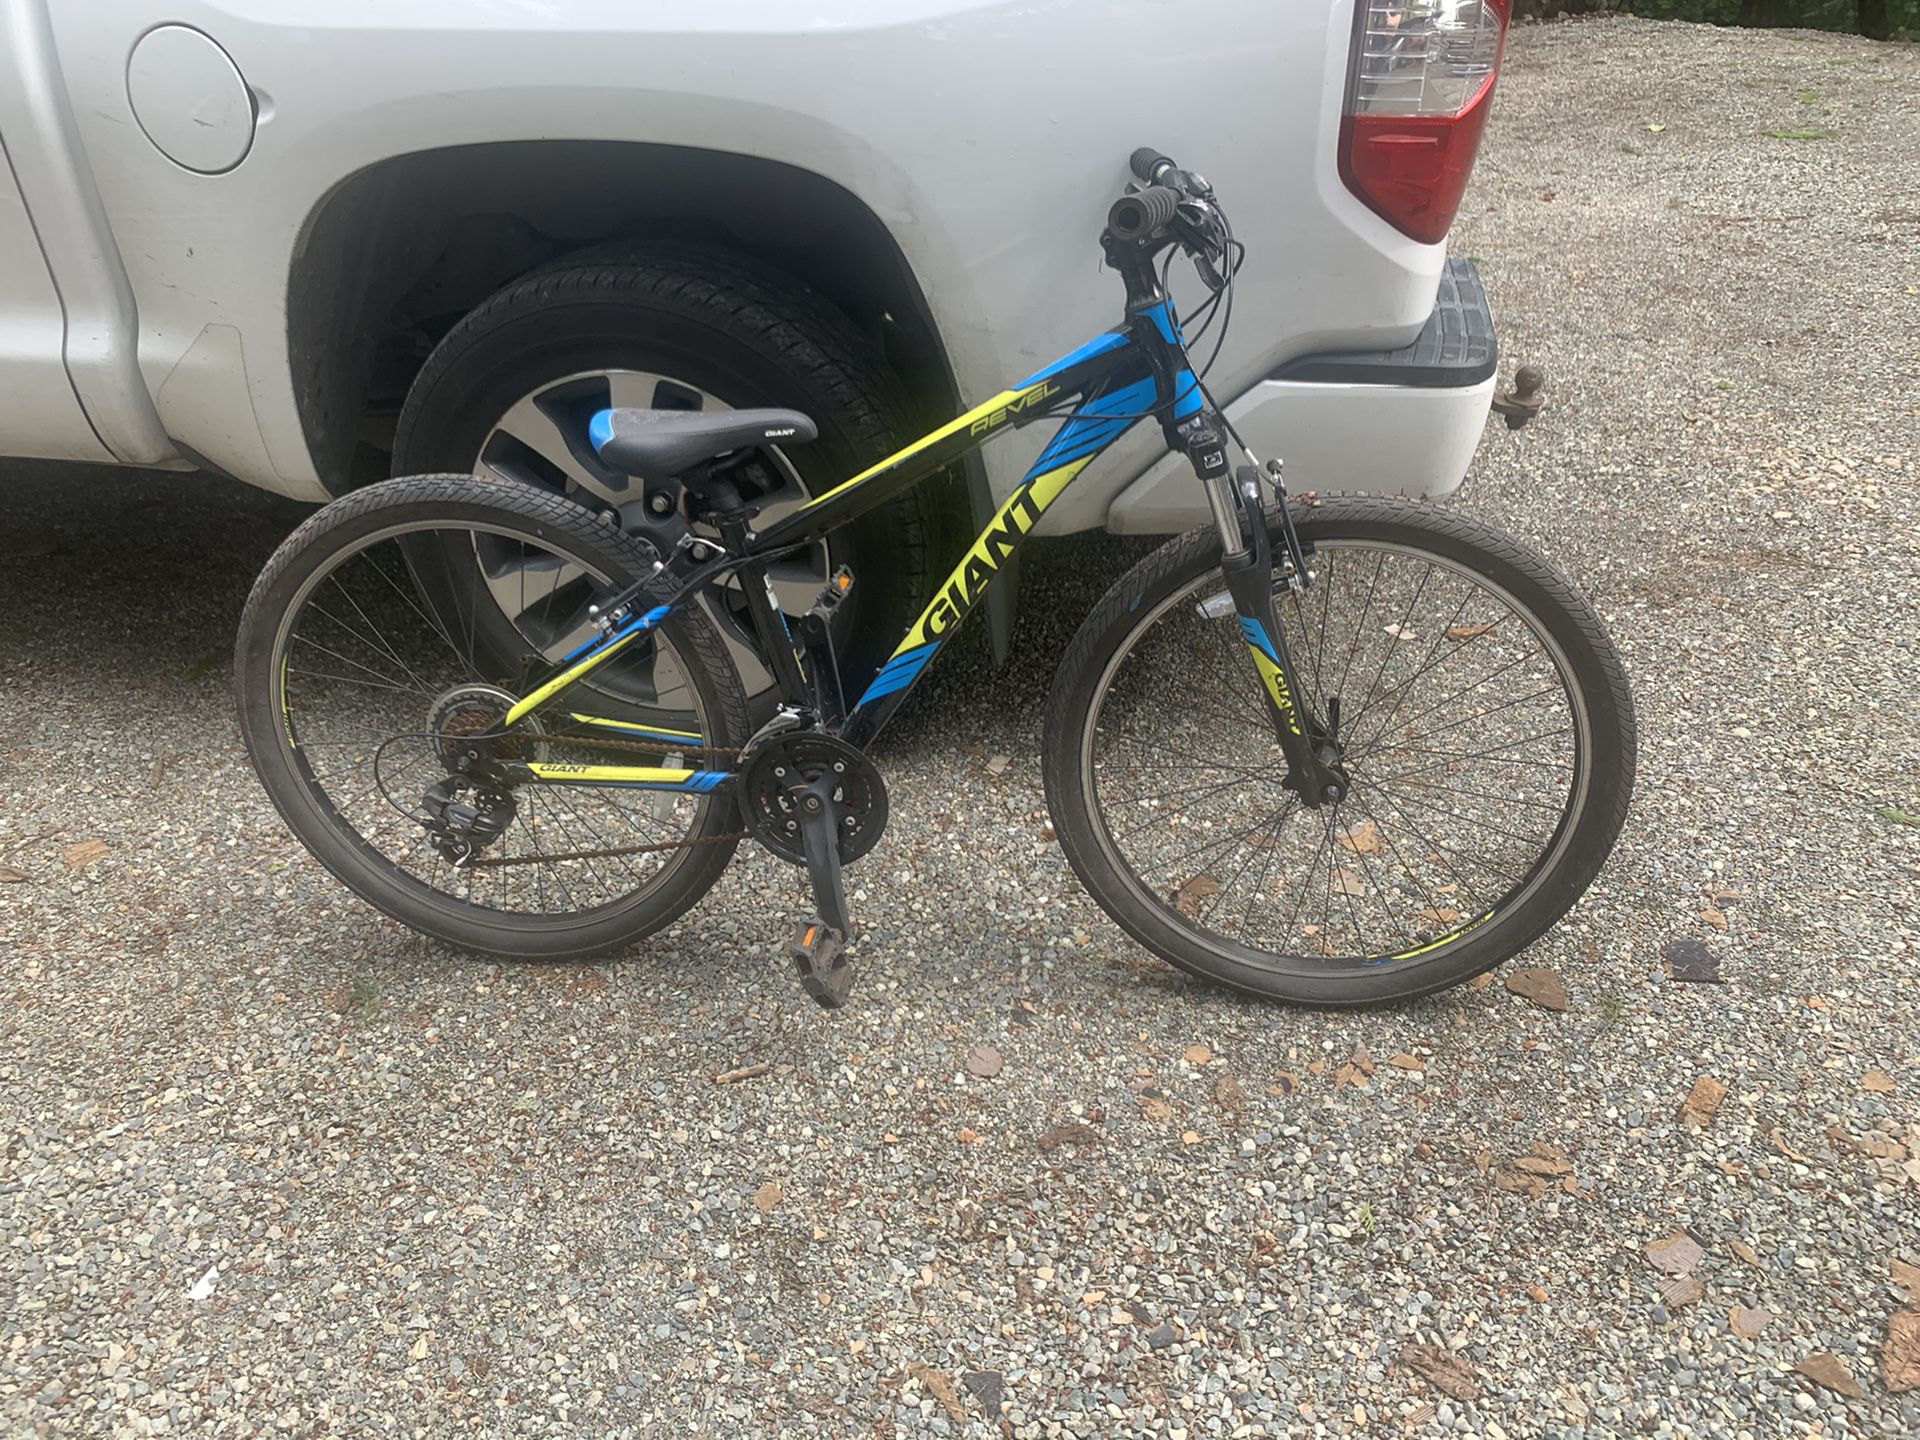 15 speed bike. Brand: Giant. Not interested in answering too many questions about it.